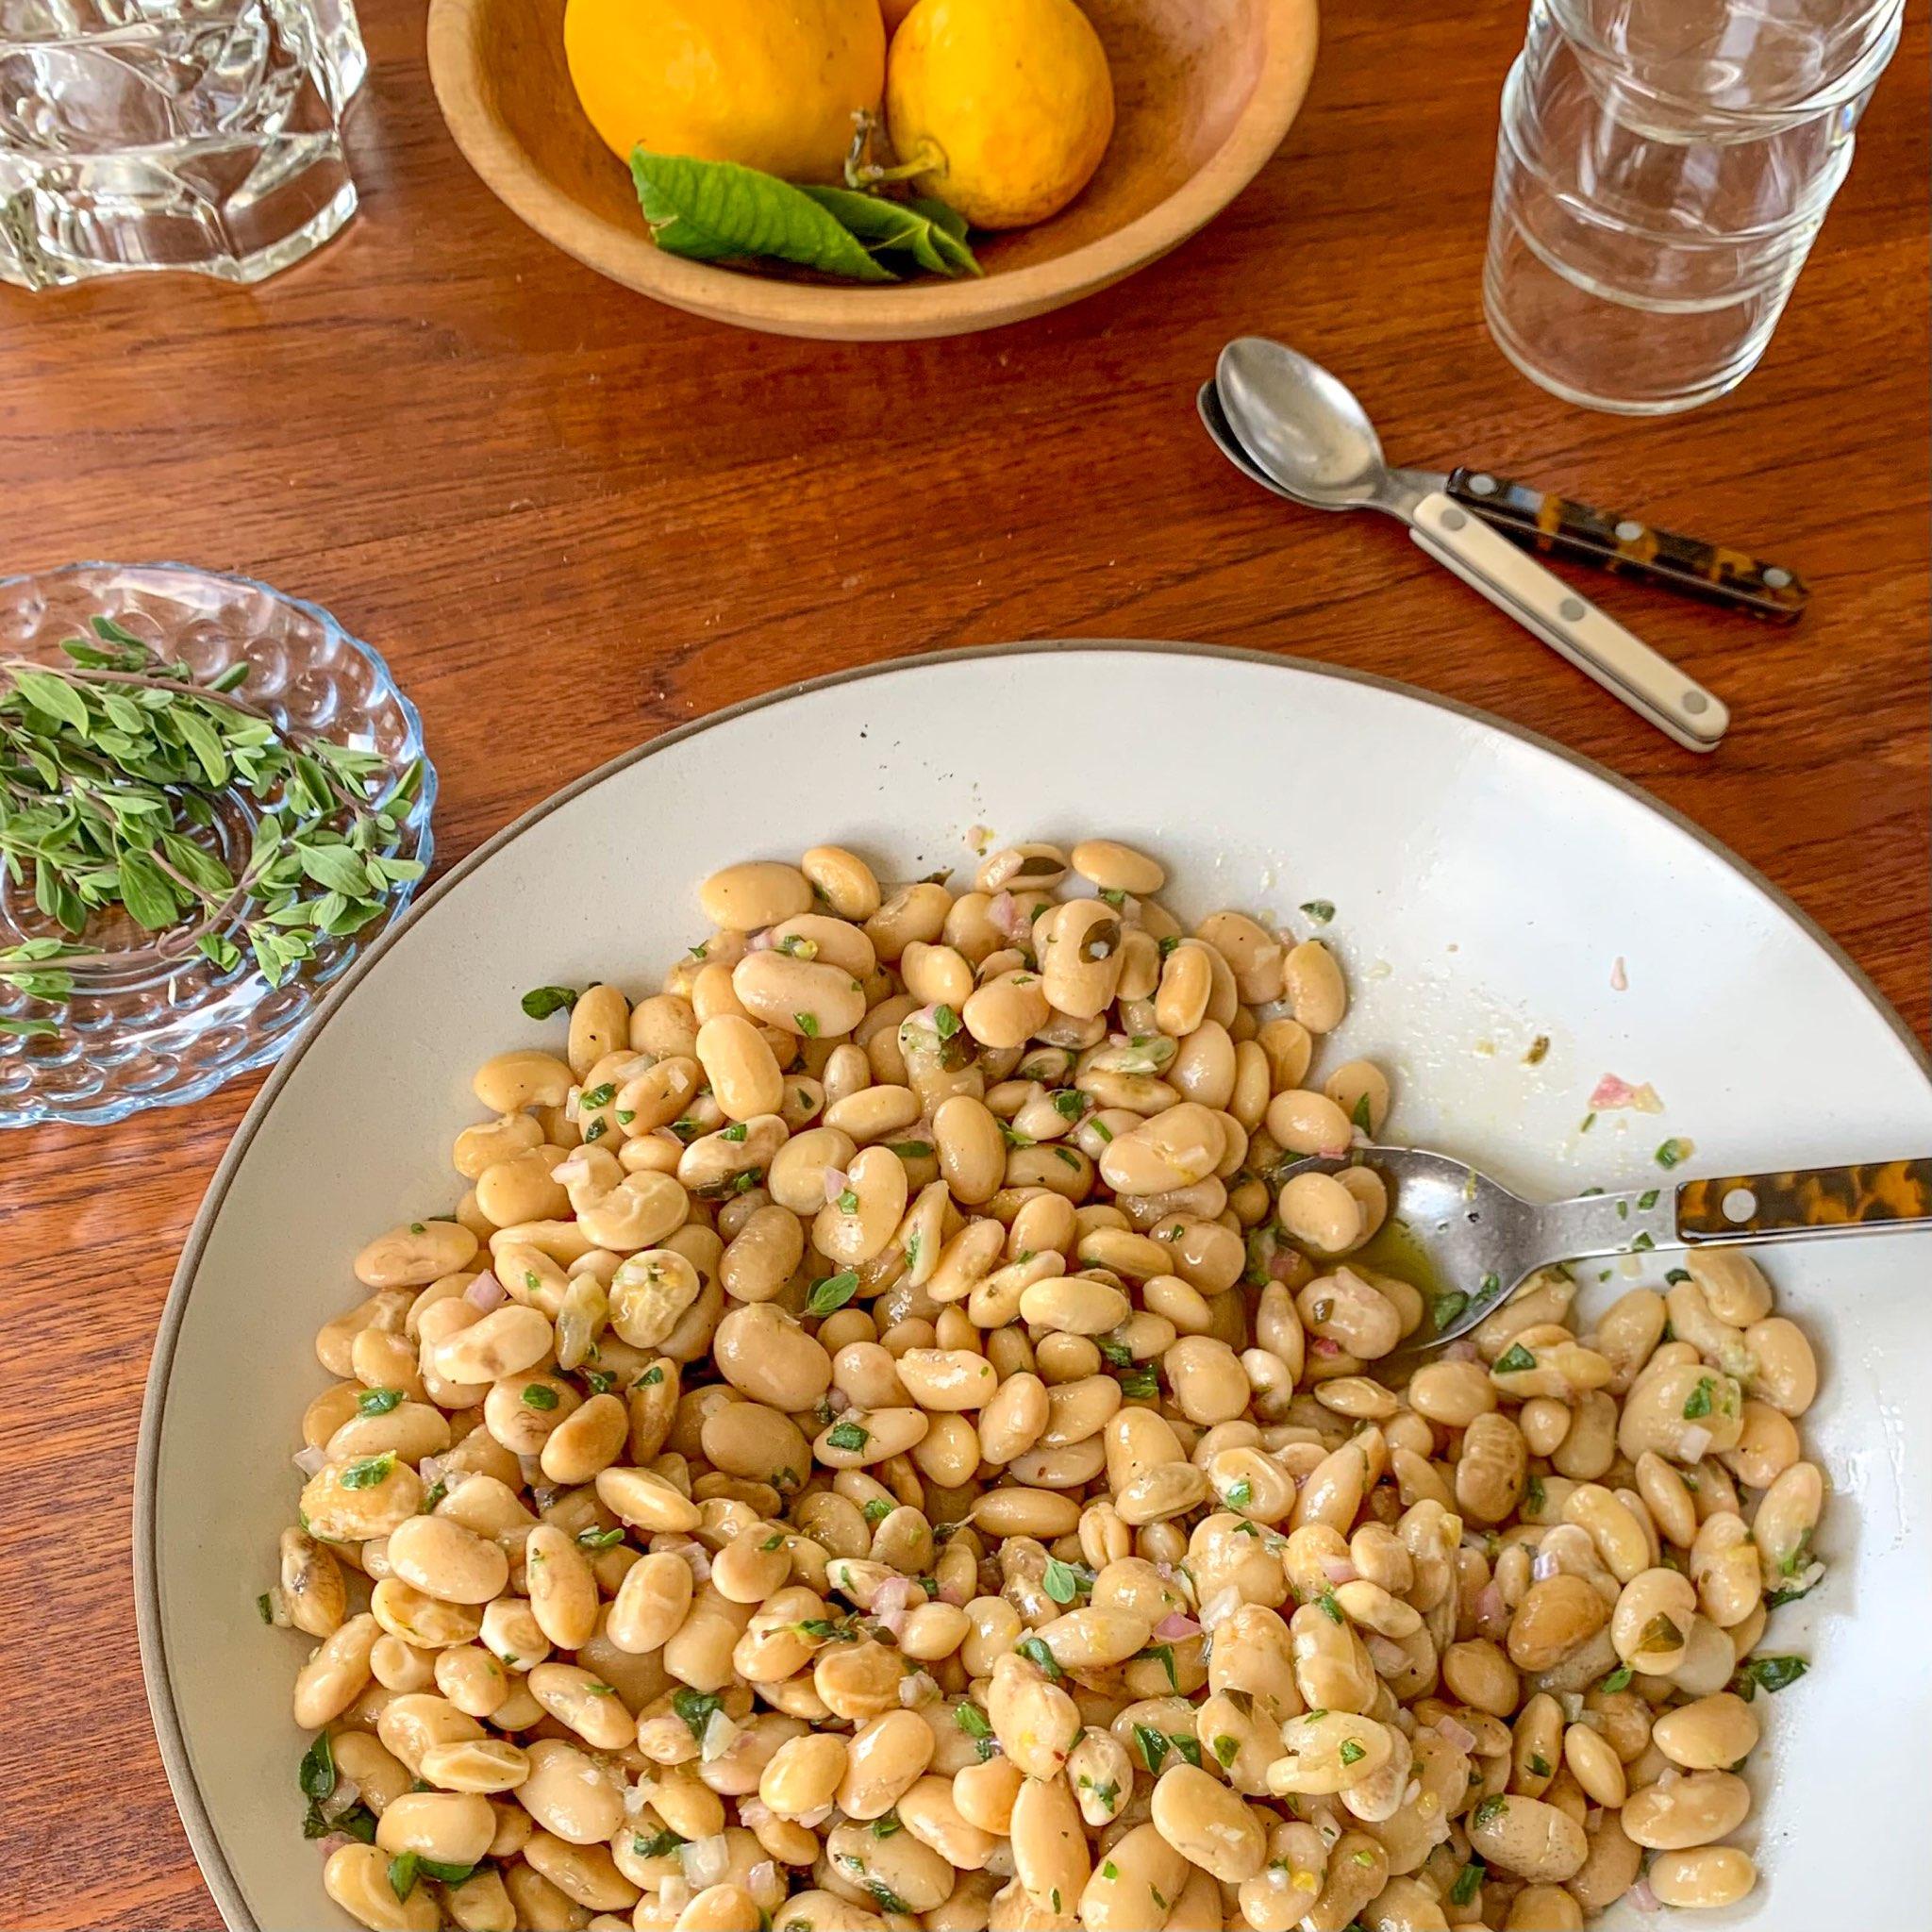 Herby marinated white beans by Annie Lucey with Primary Beans Ayocote Blanco beans